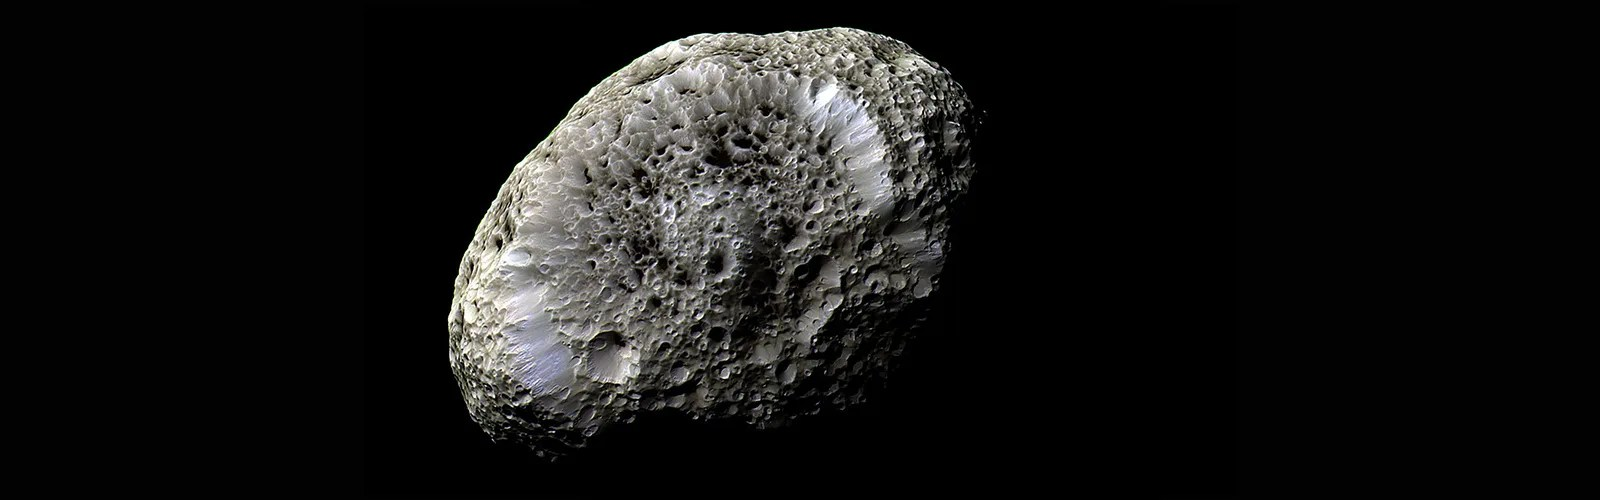 One of the moons in our solar system